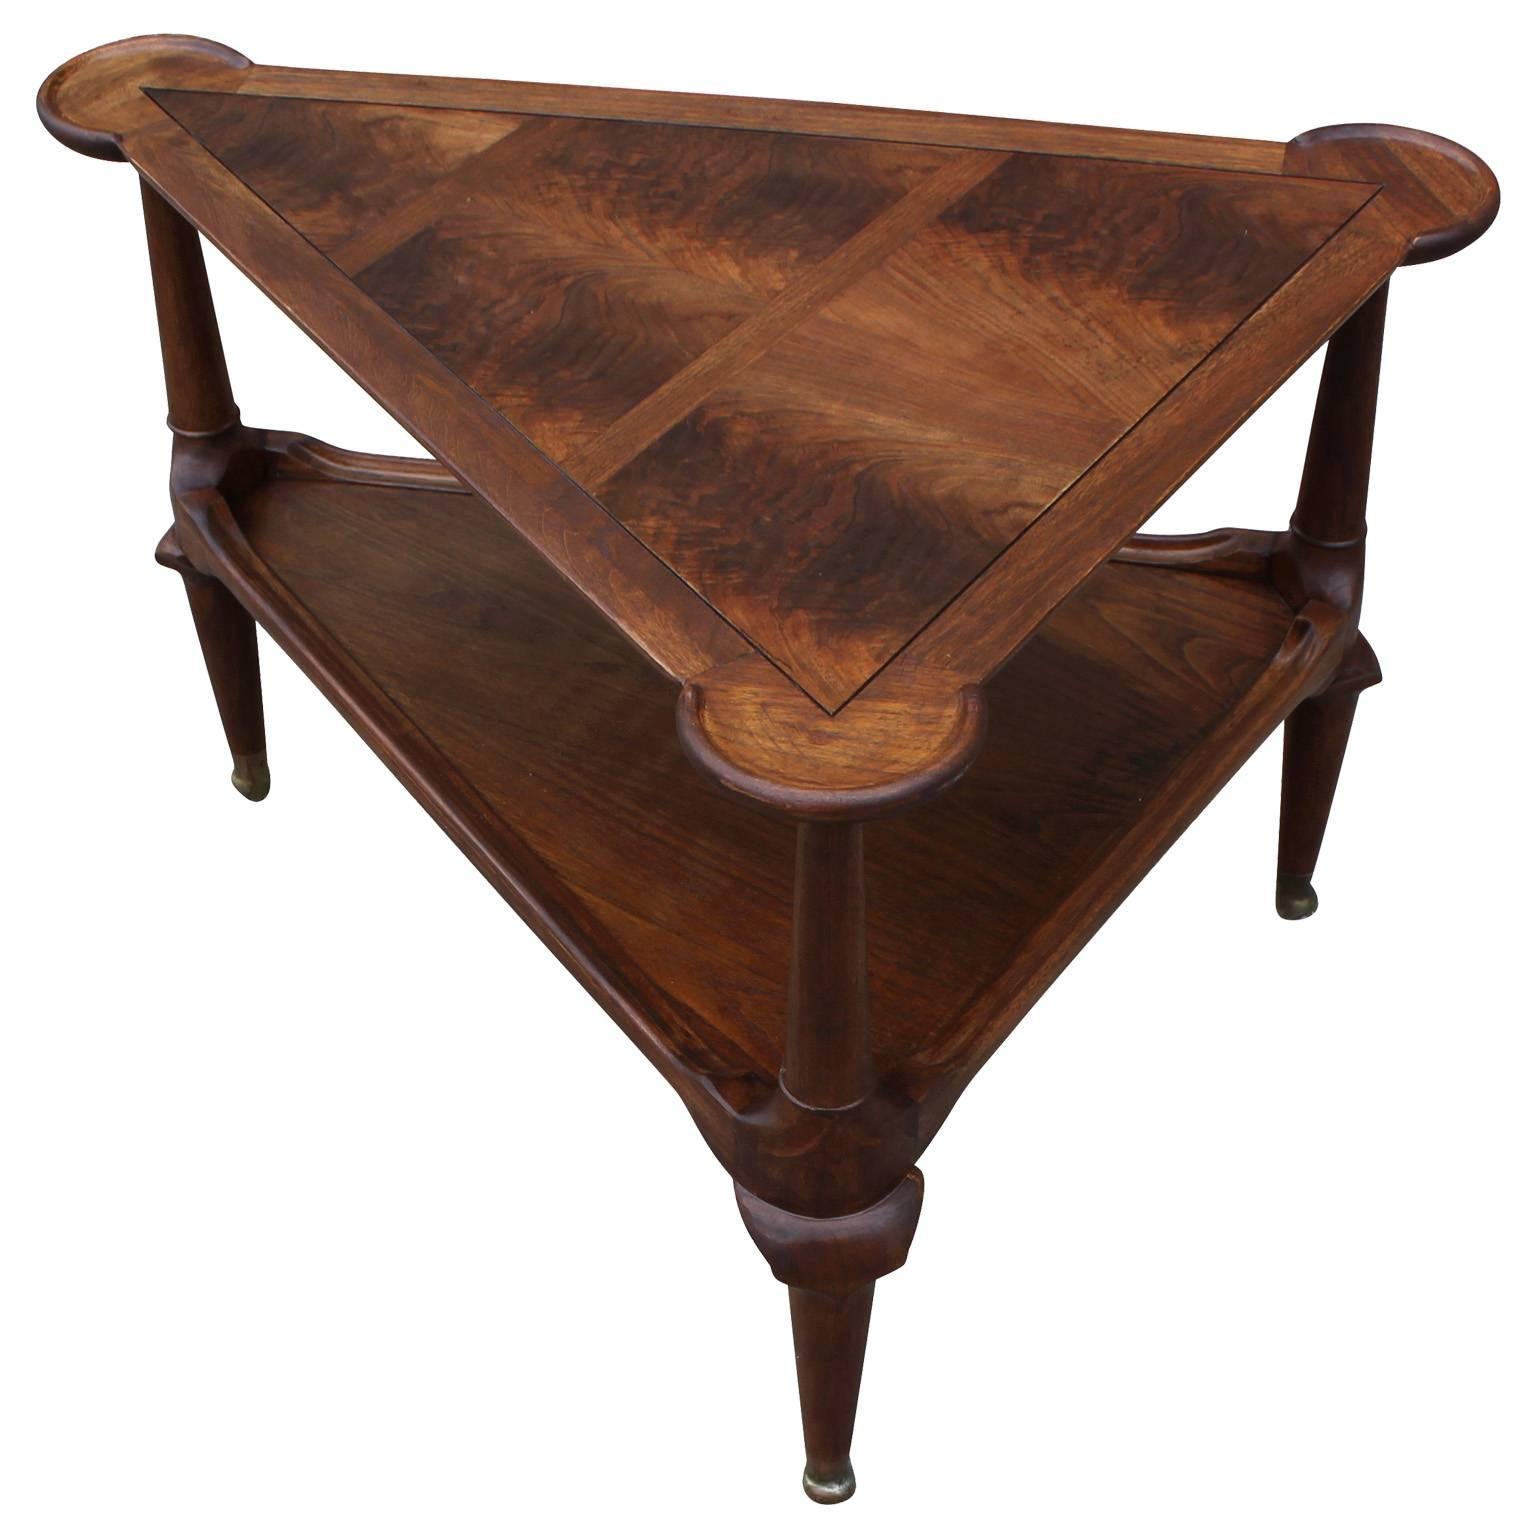 Excellent Mastercraft triangle shaped side or occasional table with beautiful walnut grain. Table top inlay gives an almost pyramid like motif. Legs have an elegant curves.